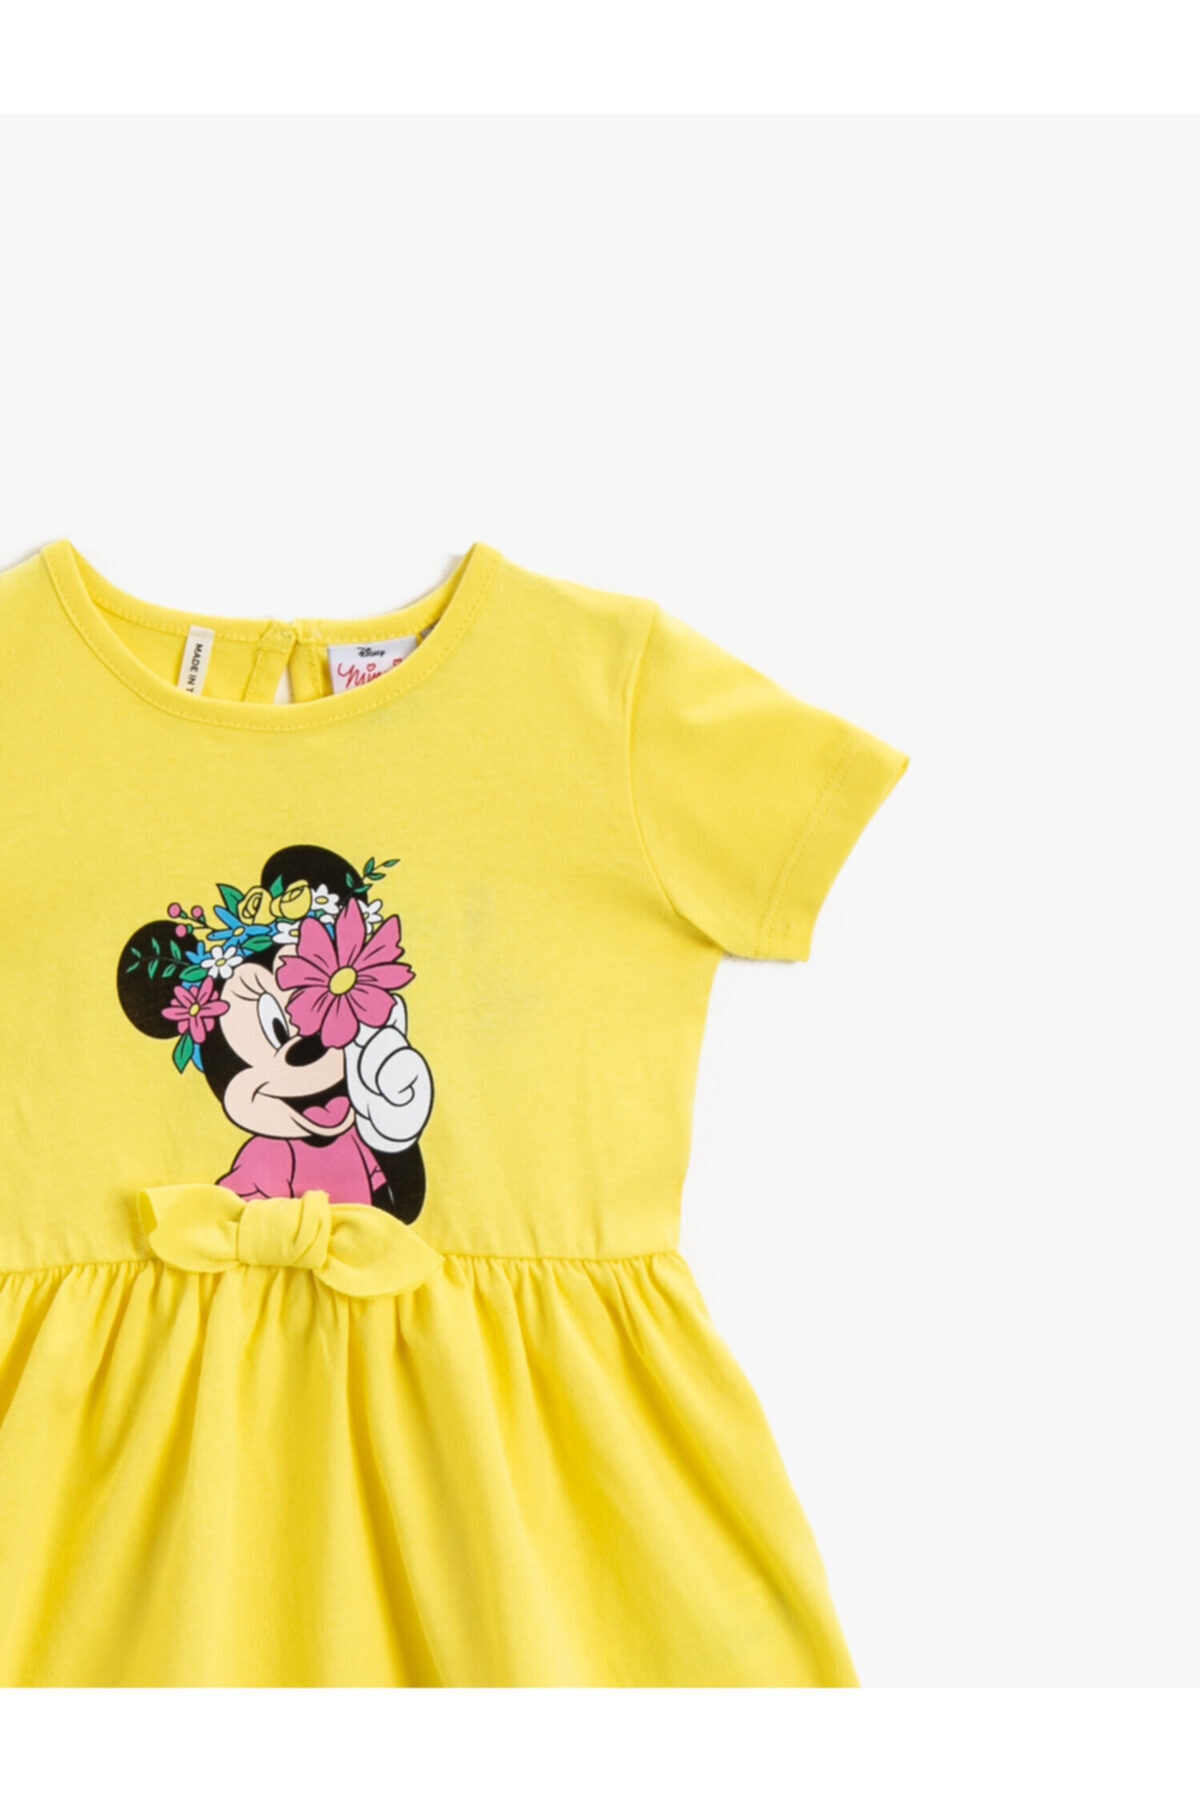 Koton Baby Girl Yellow Minnie Mouse Dress Licensed Cotton